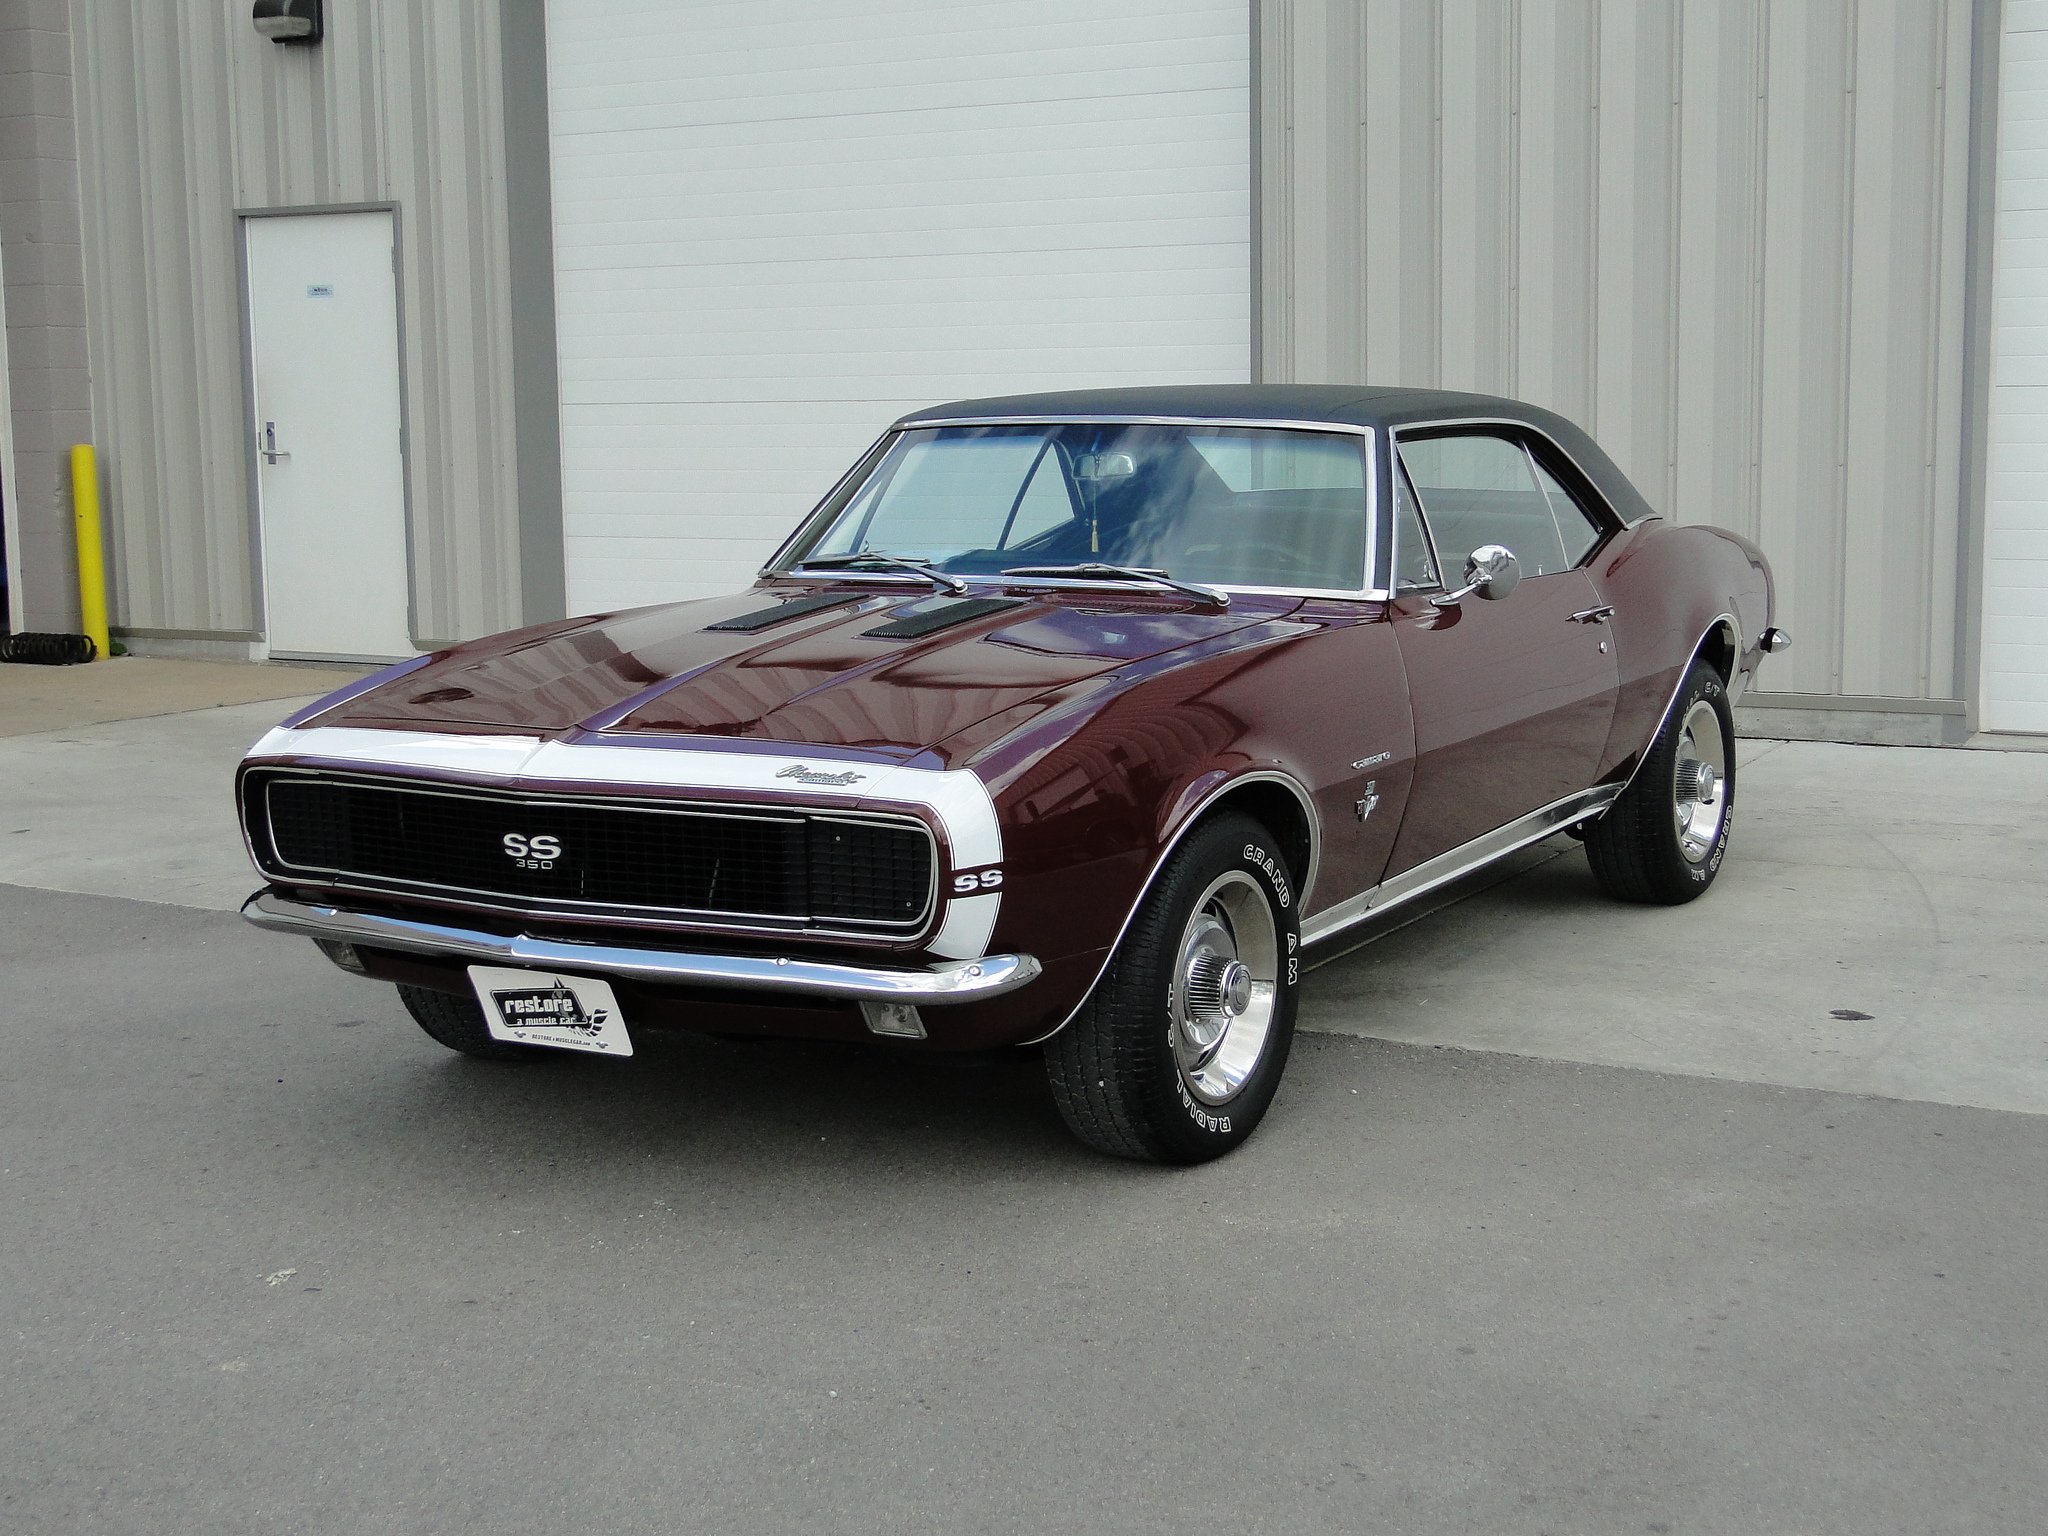 1967, Camaro, Ss, Chevy, Chevrolet, Cars, Coupe Wallpaper